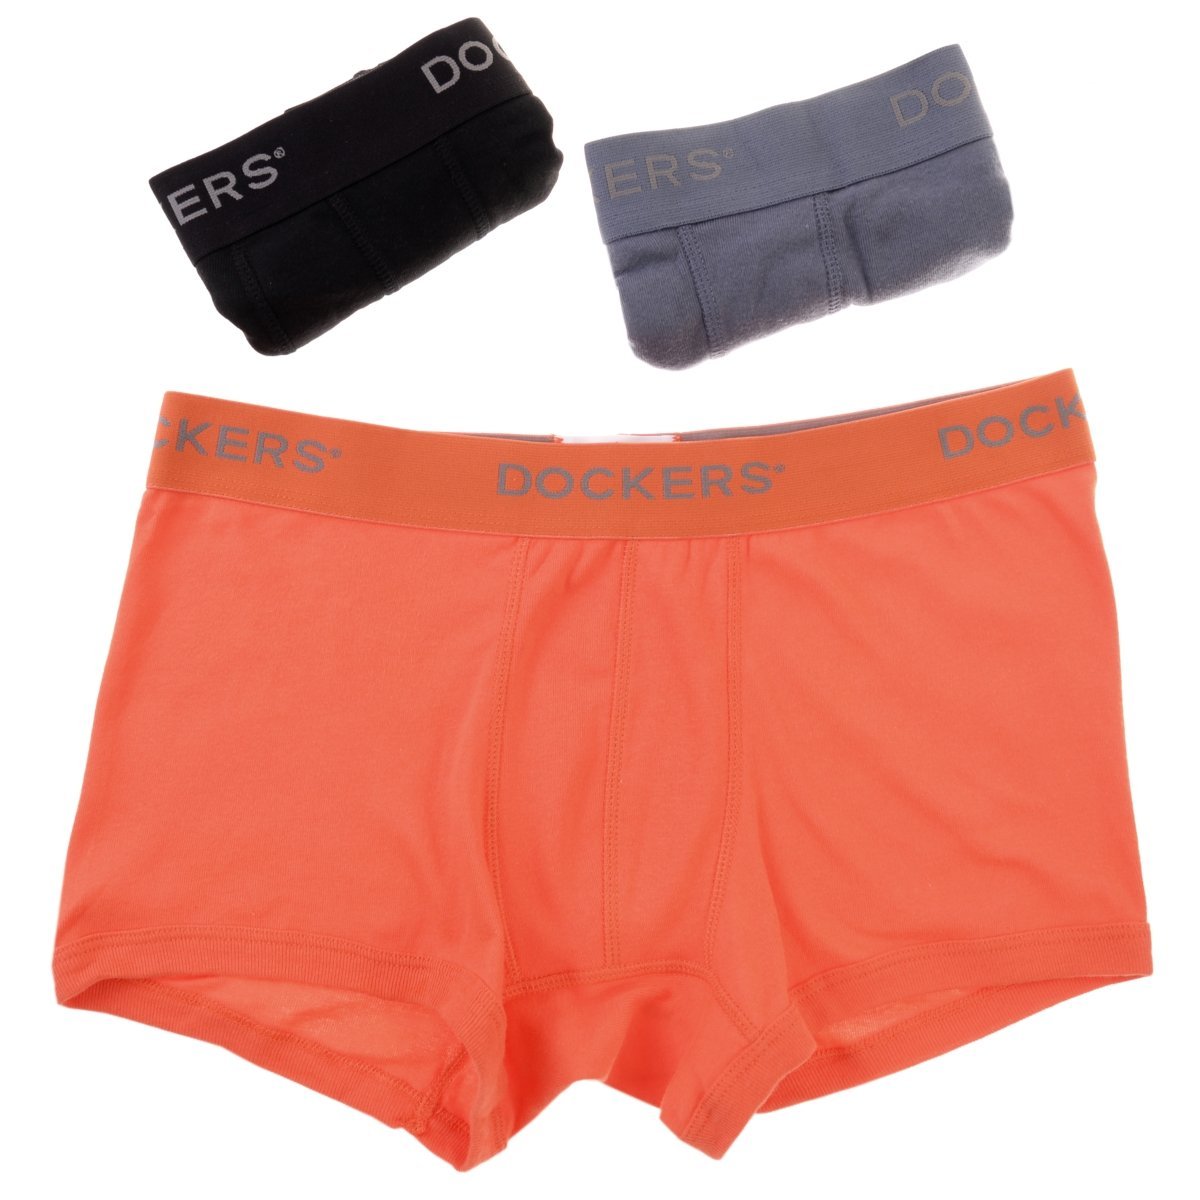 Boxer Trunk 3 Pack Dockers